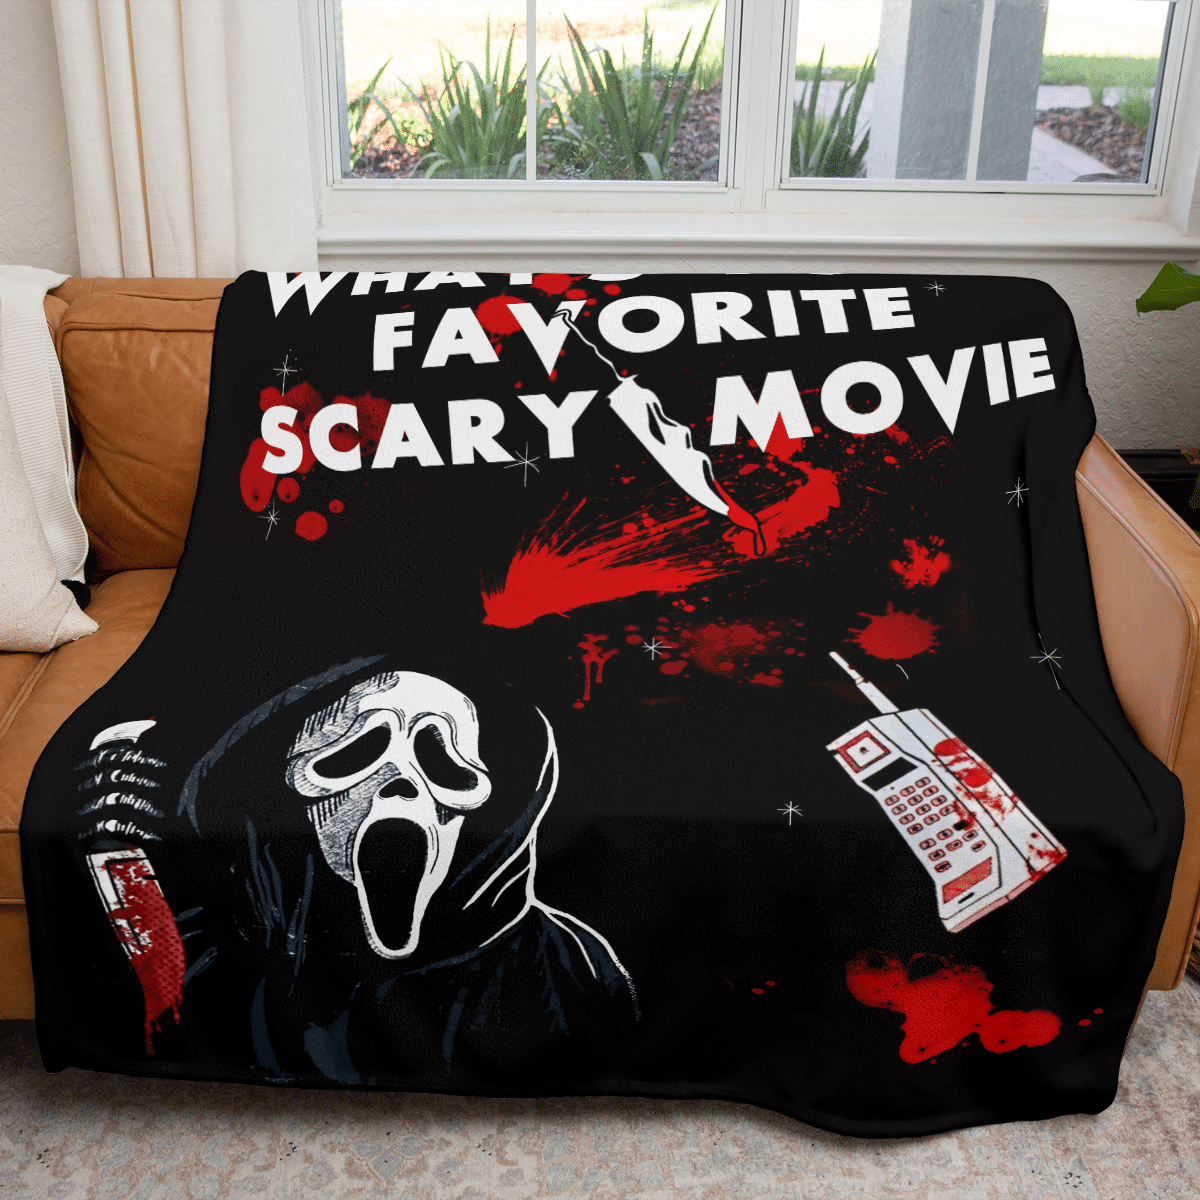 What's Your Favorite Scary Movie Fleece Blanket - Quilt